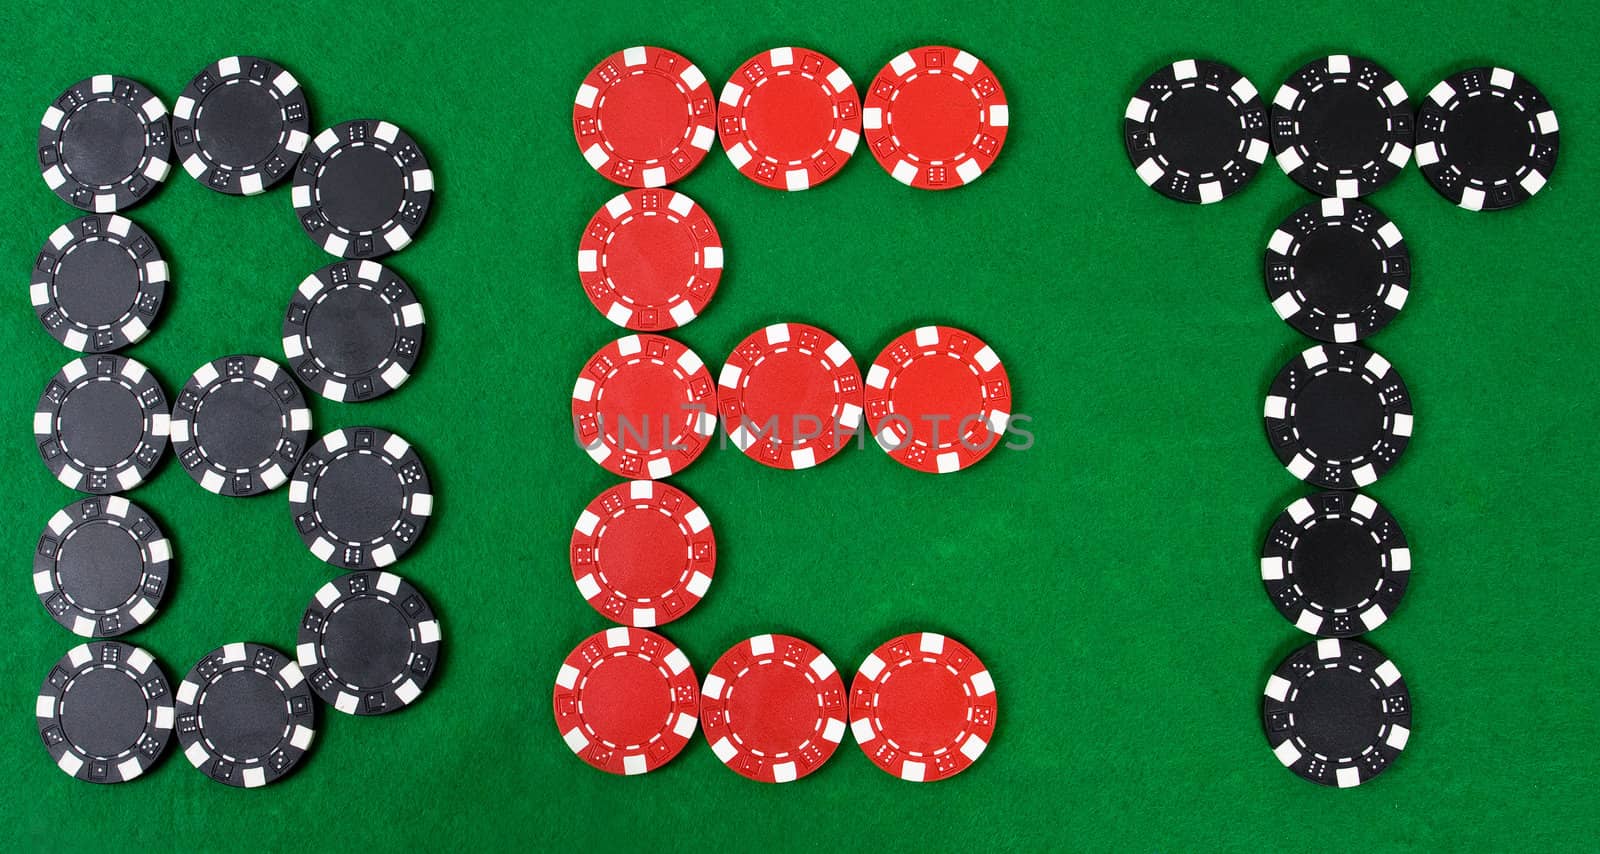 Bet - word build using red and black poker chips. Green poker table.